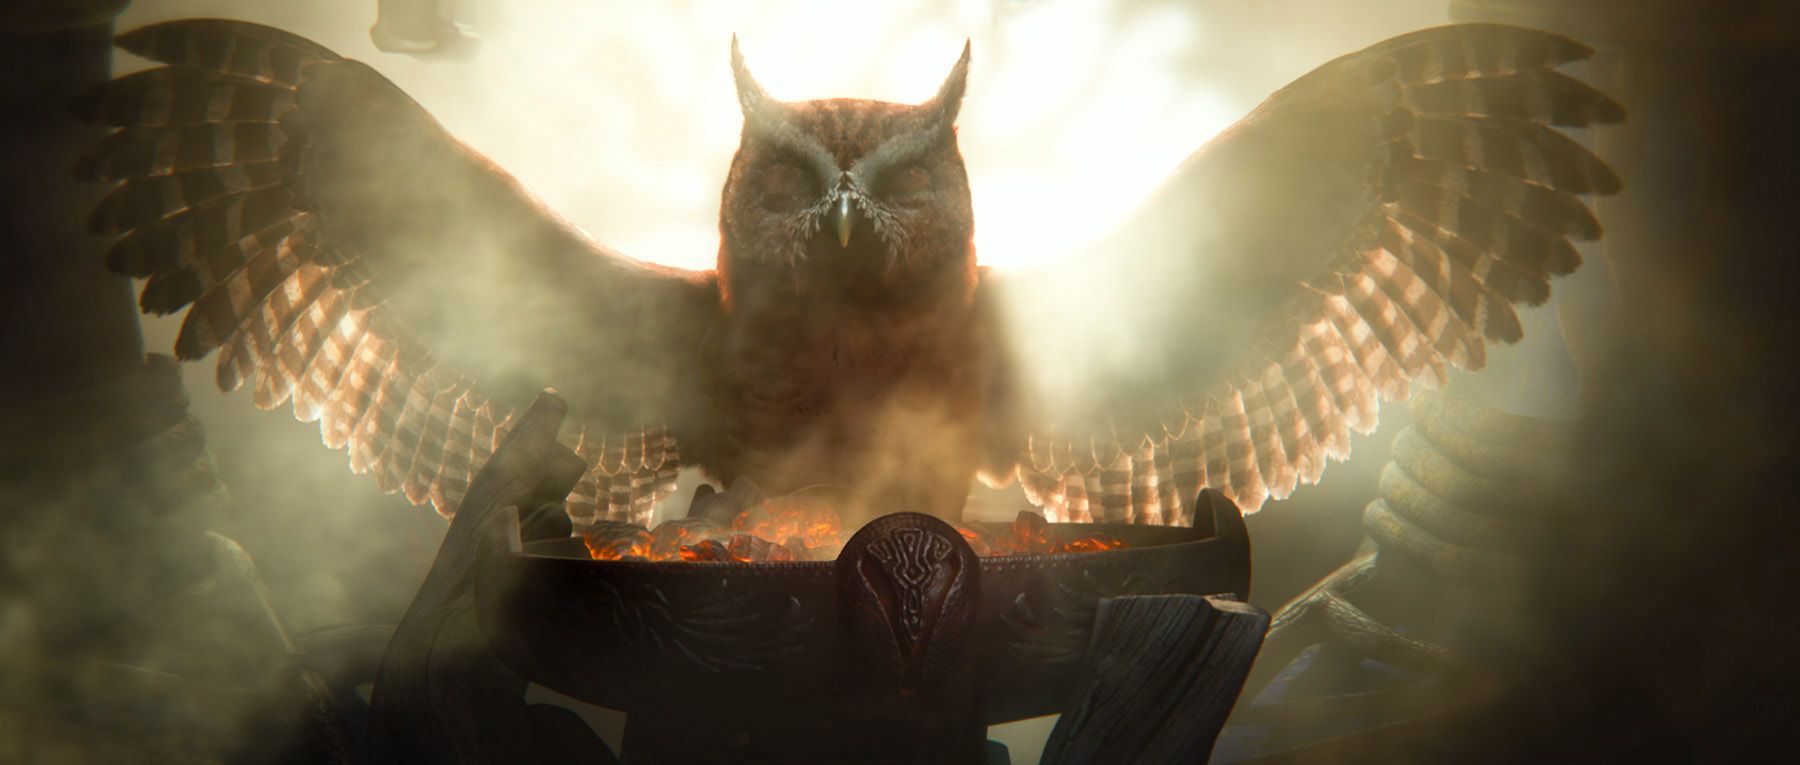 Legend of the Guardians: The Owls of Ga'Hoole Image #3